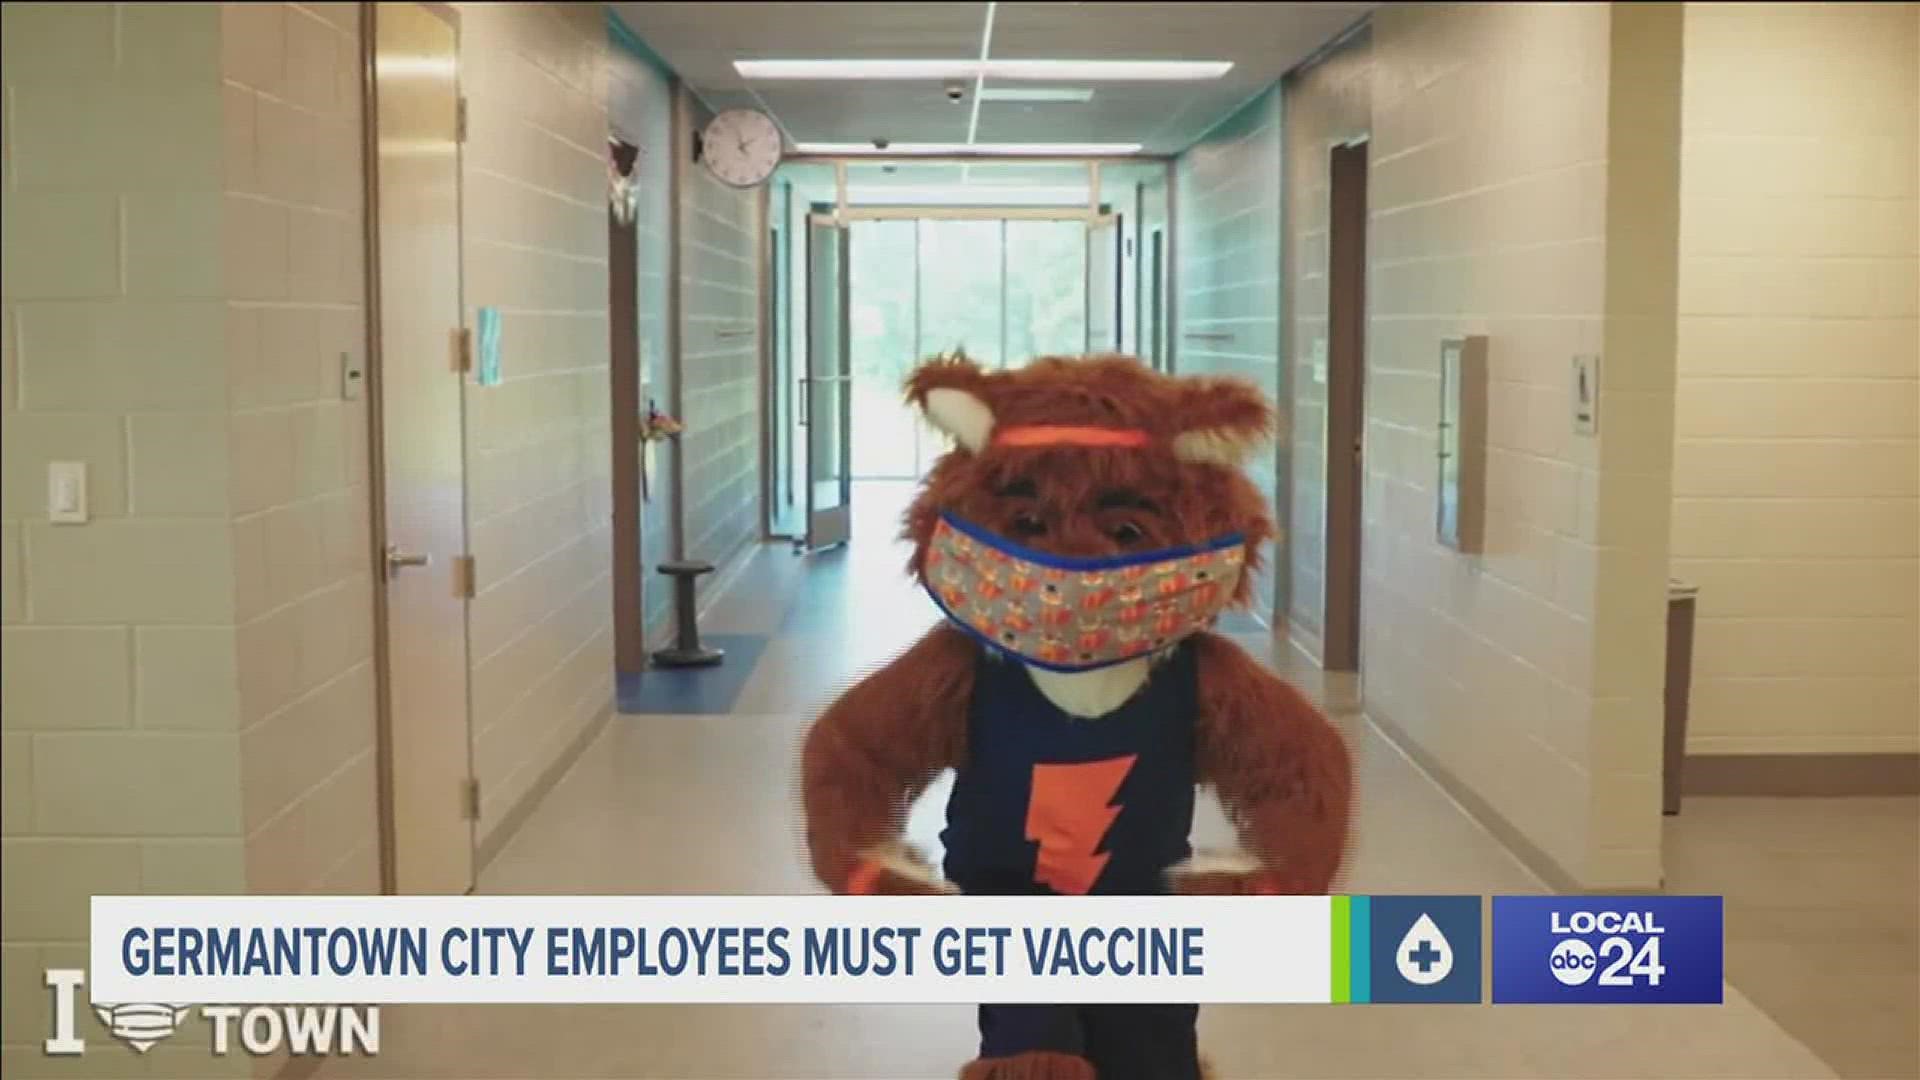 City of Germantown employees may face firing if proof of full COVID vaccination not submitted by Labor Day. City Administrator vows protection against virus.